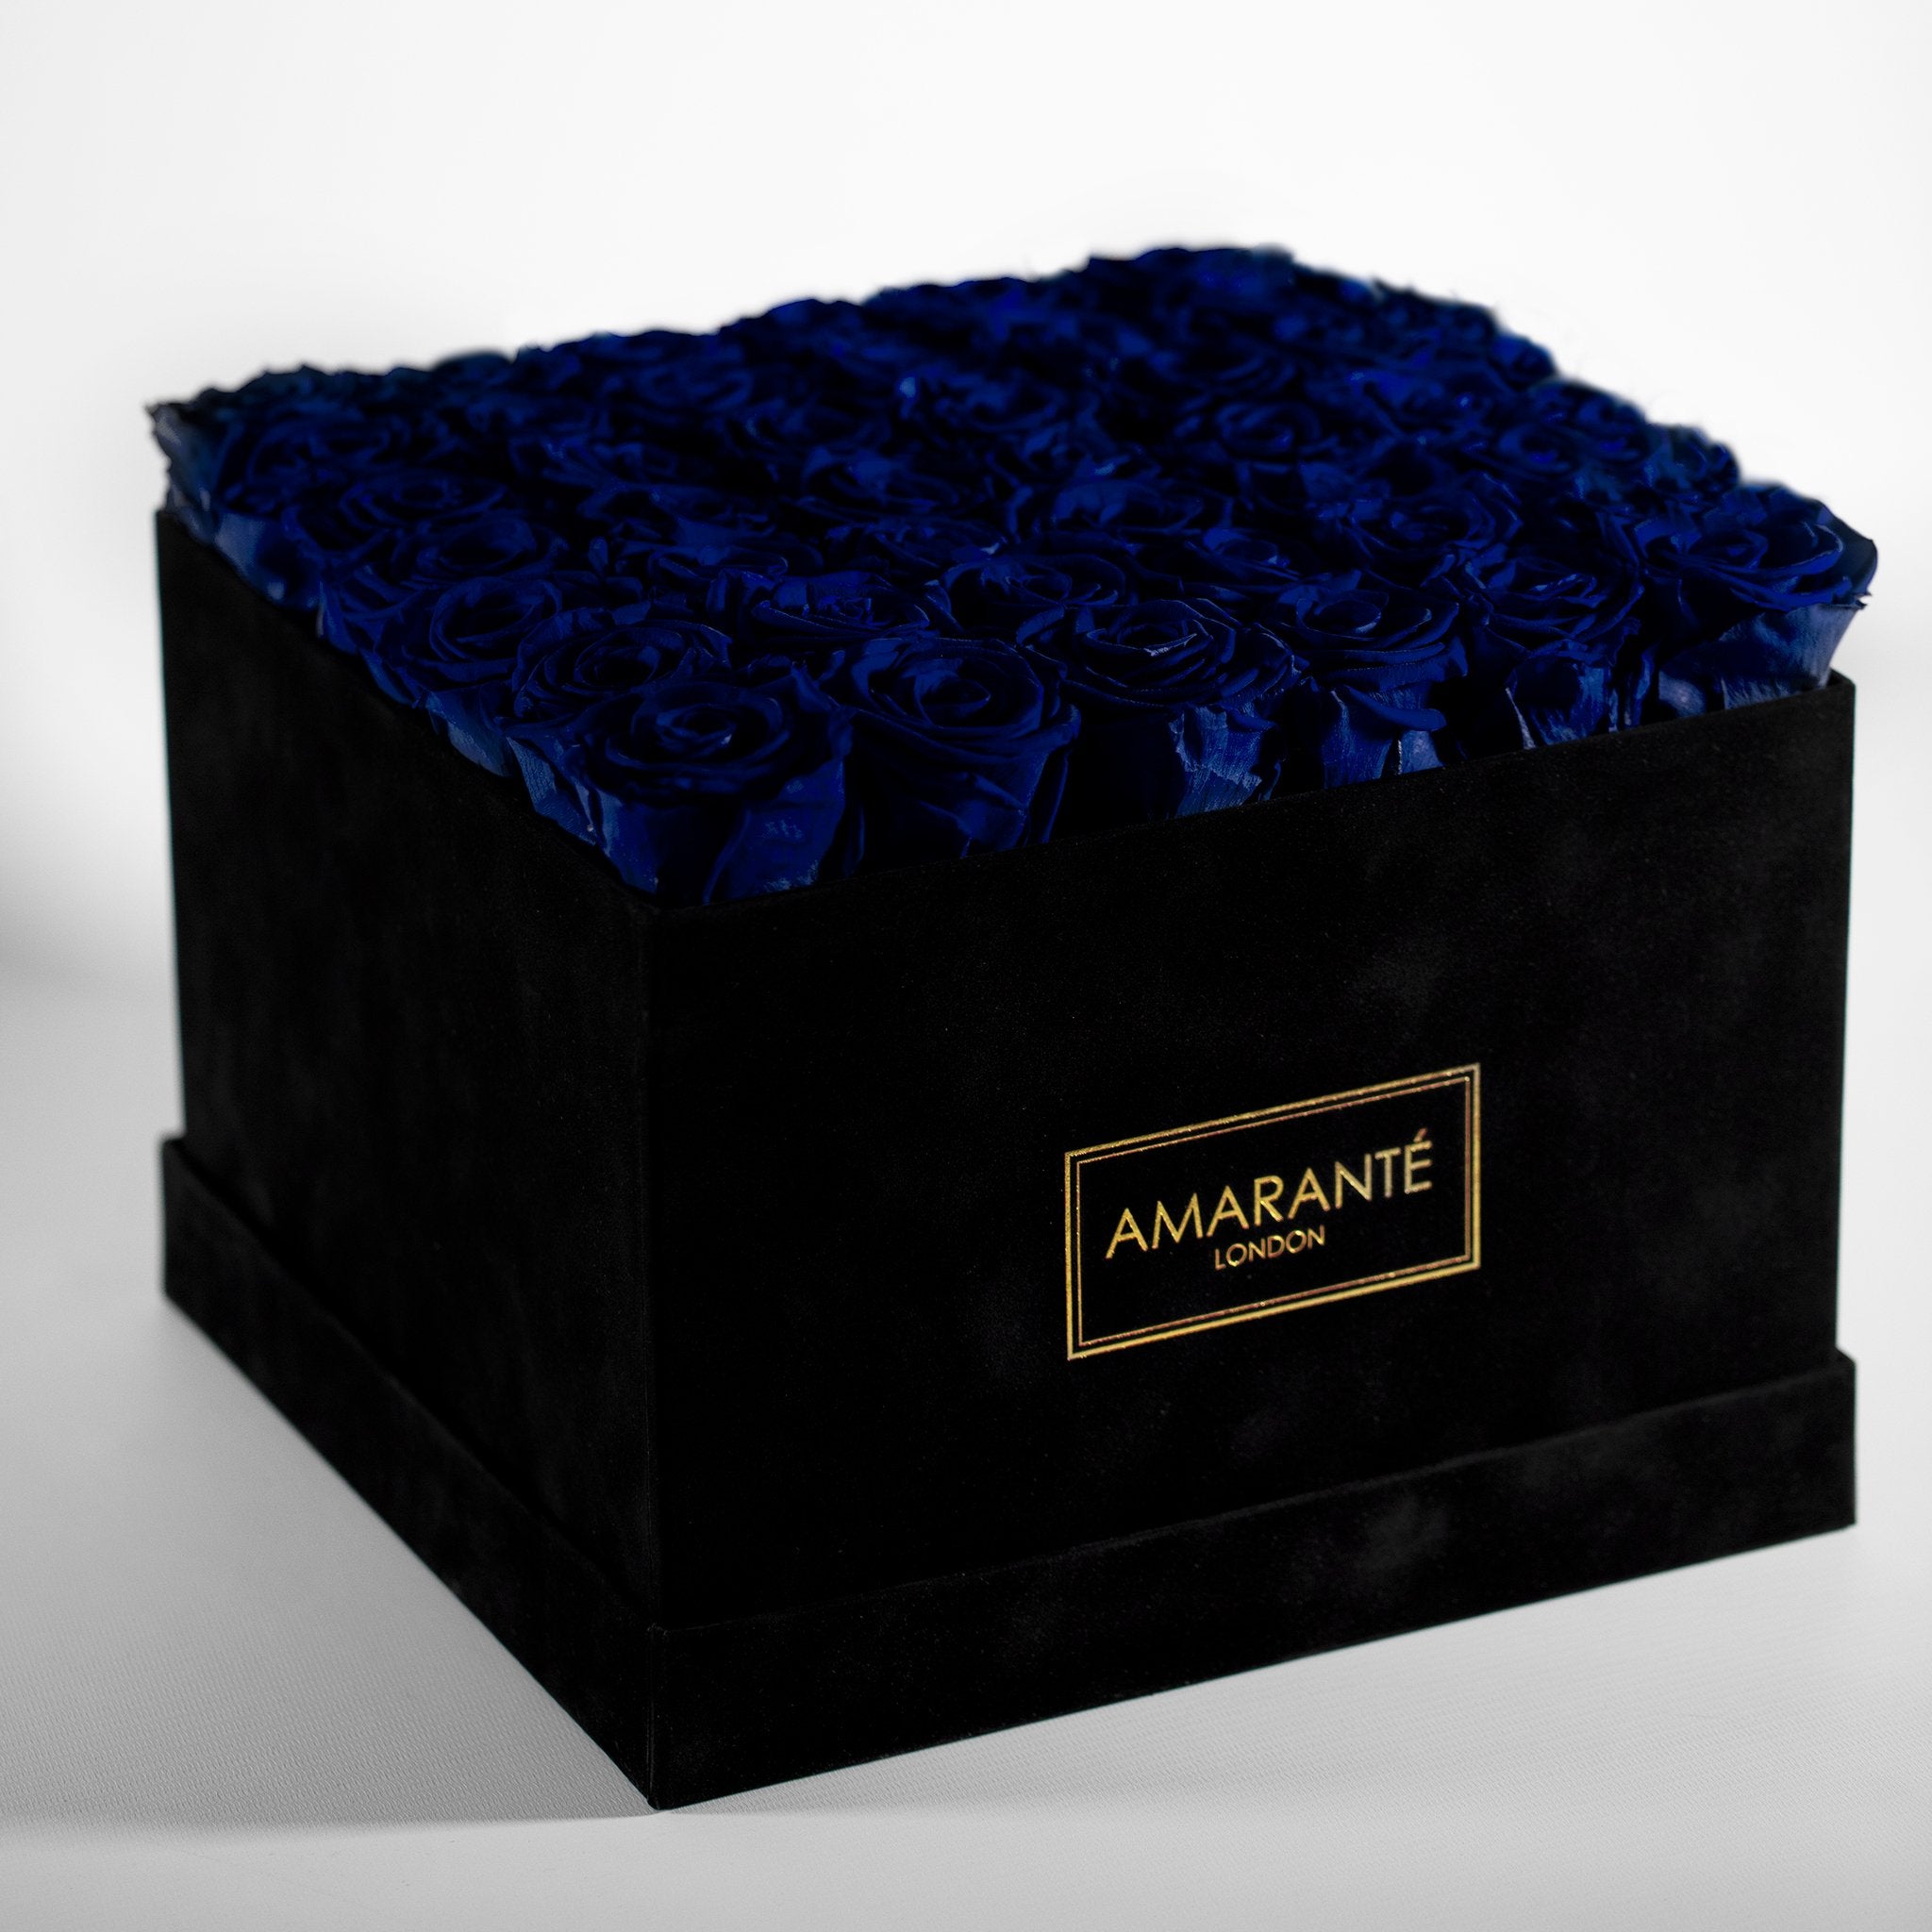 Classy extra-large rose box carrying radiant large royal blue infinity roses. Free UK Delivery.